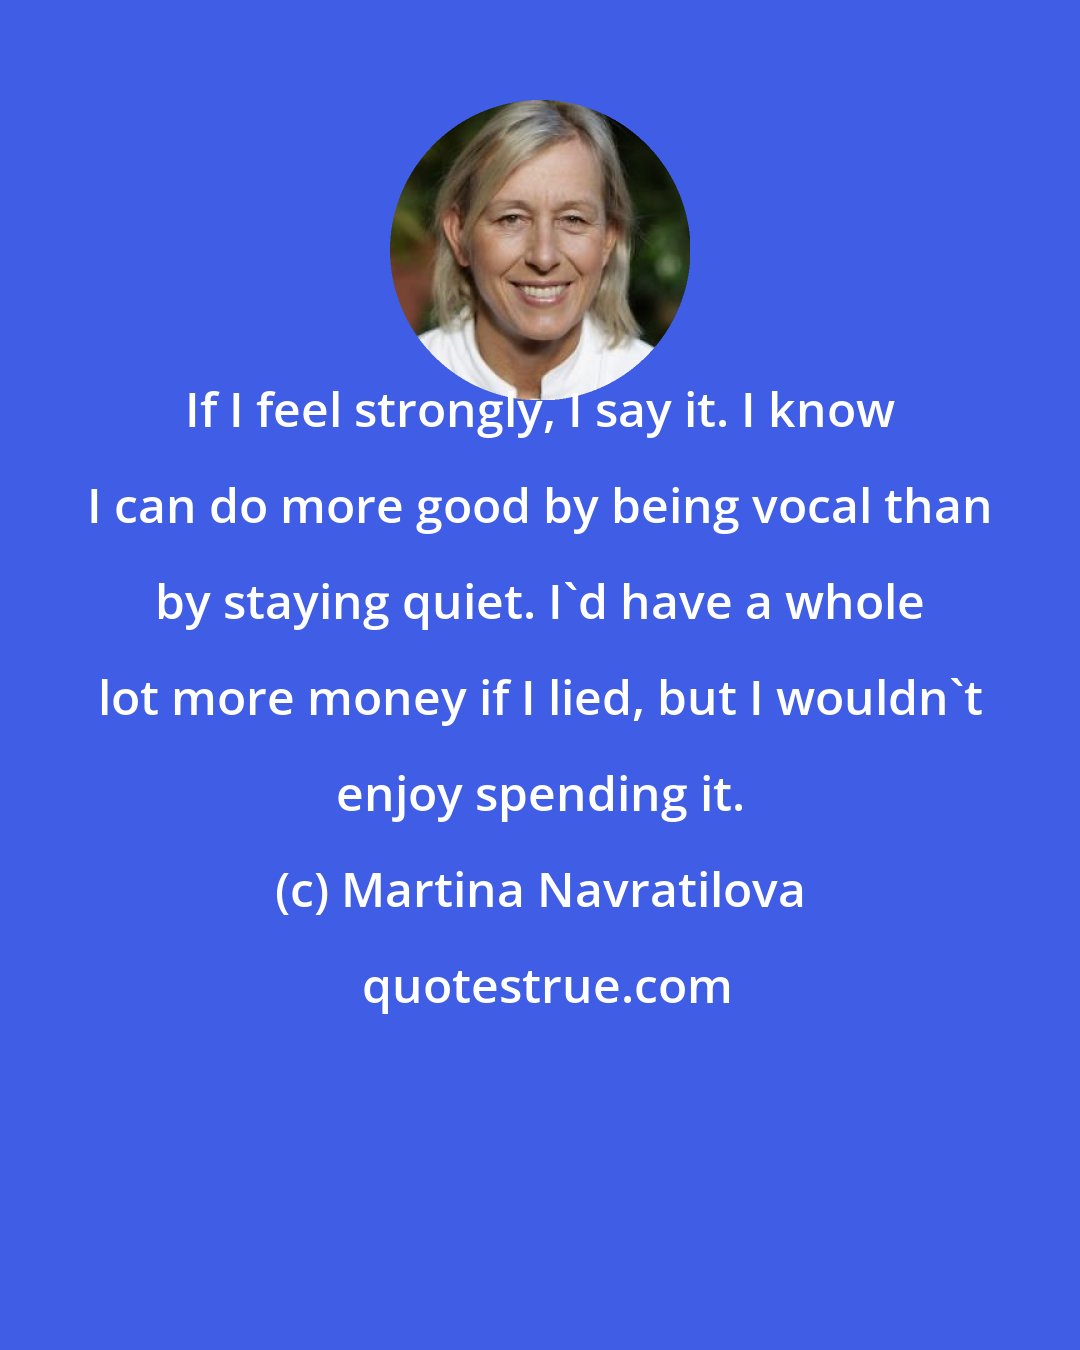 Martina Navratilova: If I feel strongly, I say it. I know I can do more good by being vocal than by staying quiet. I'd have a whole lot more money if I lied, but I wouldn't enjoy spending it.